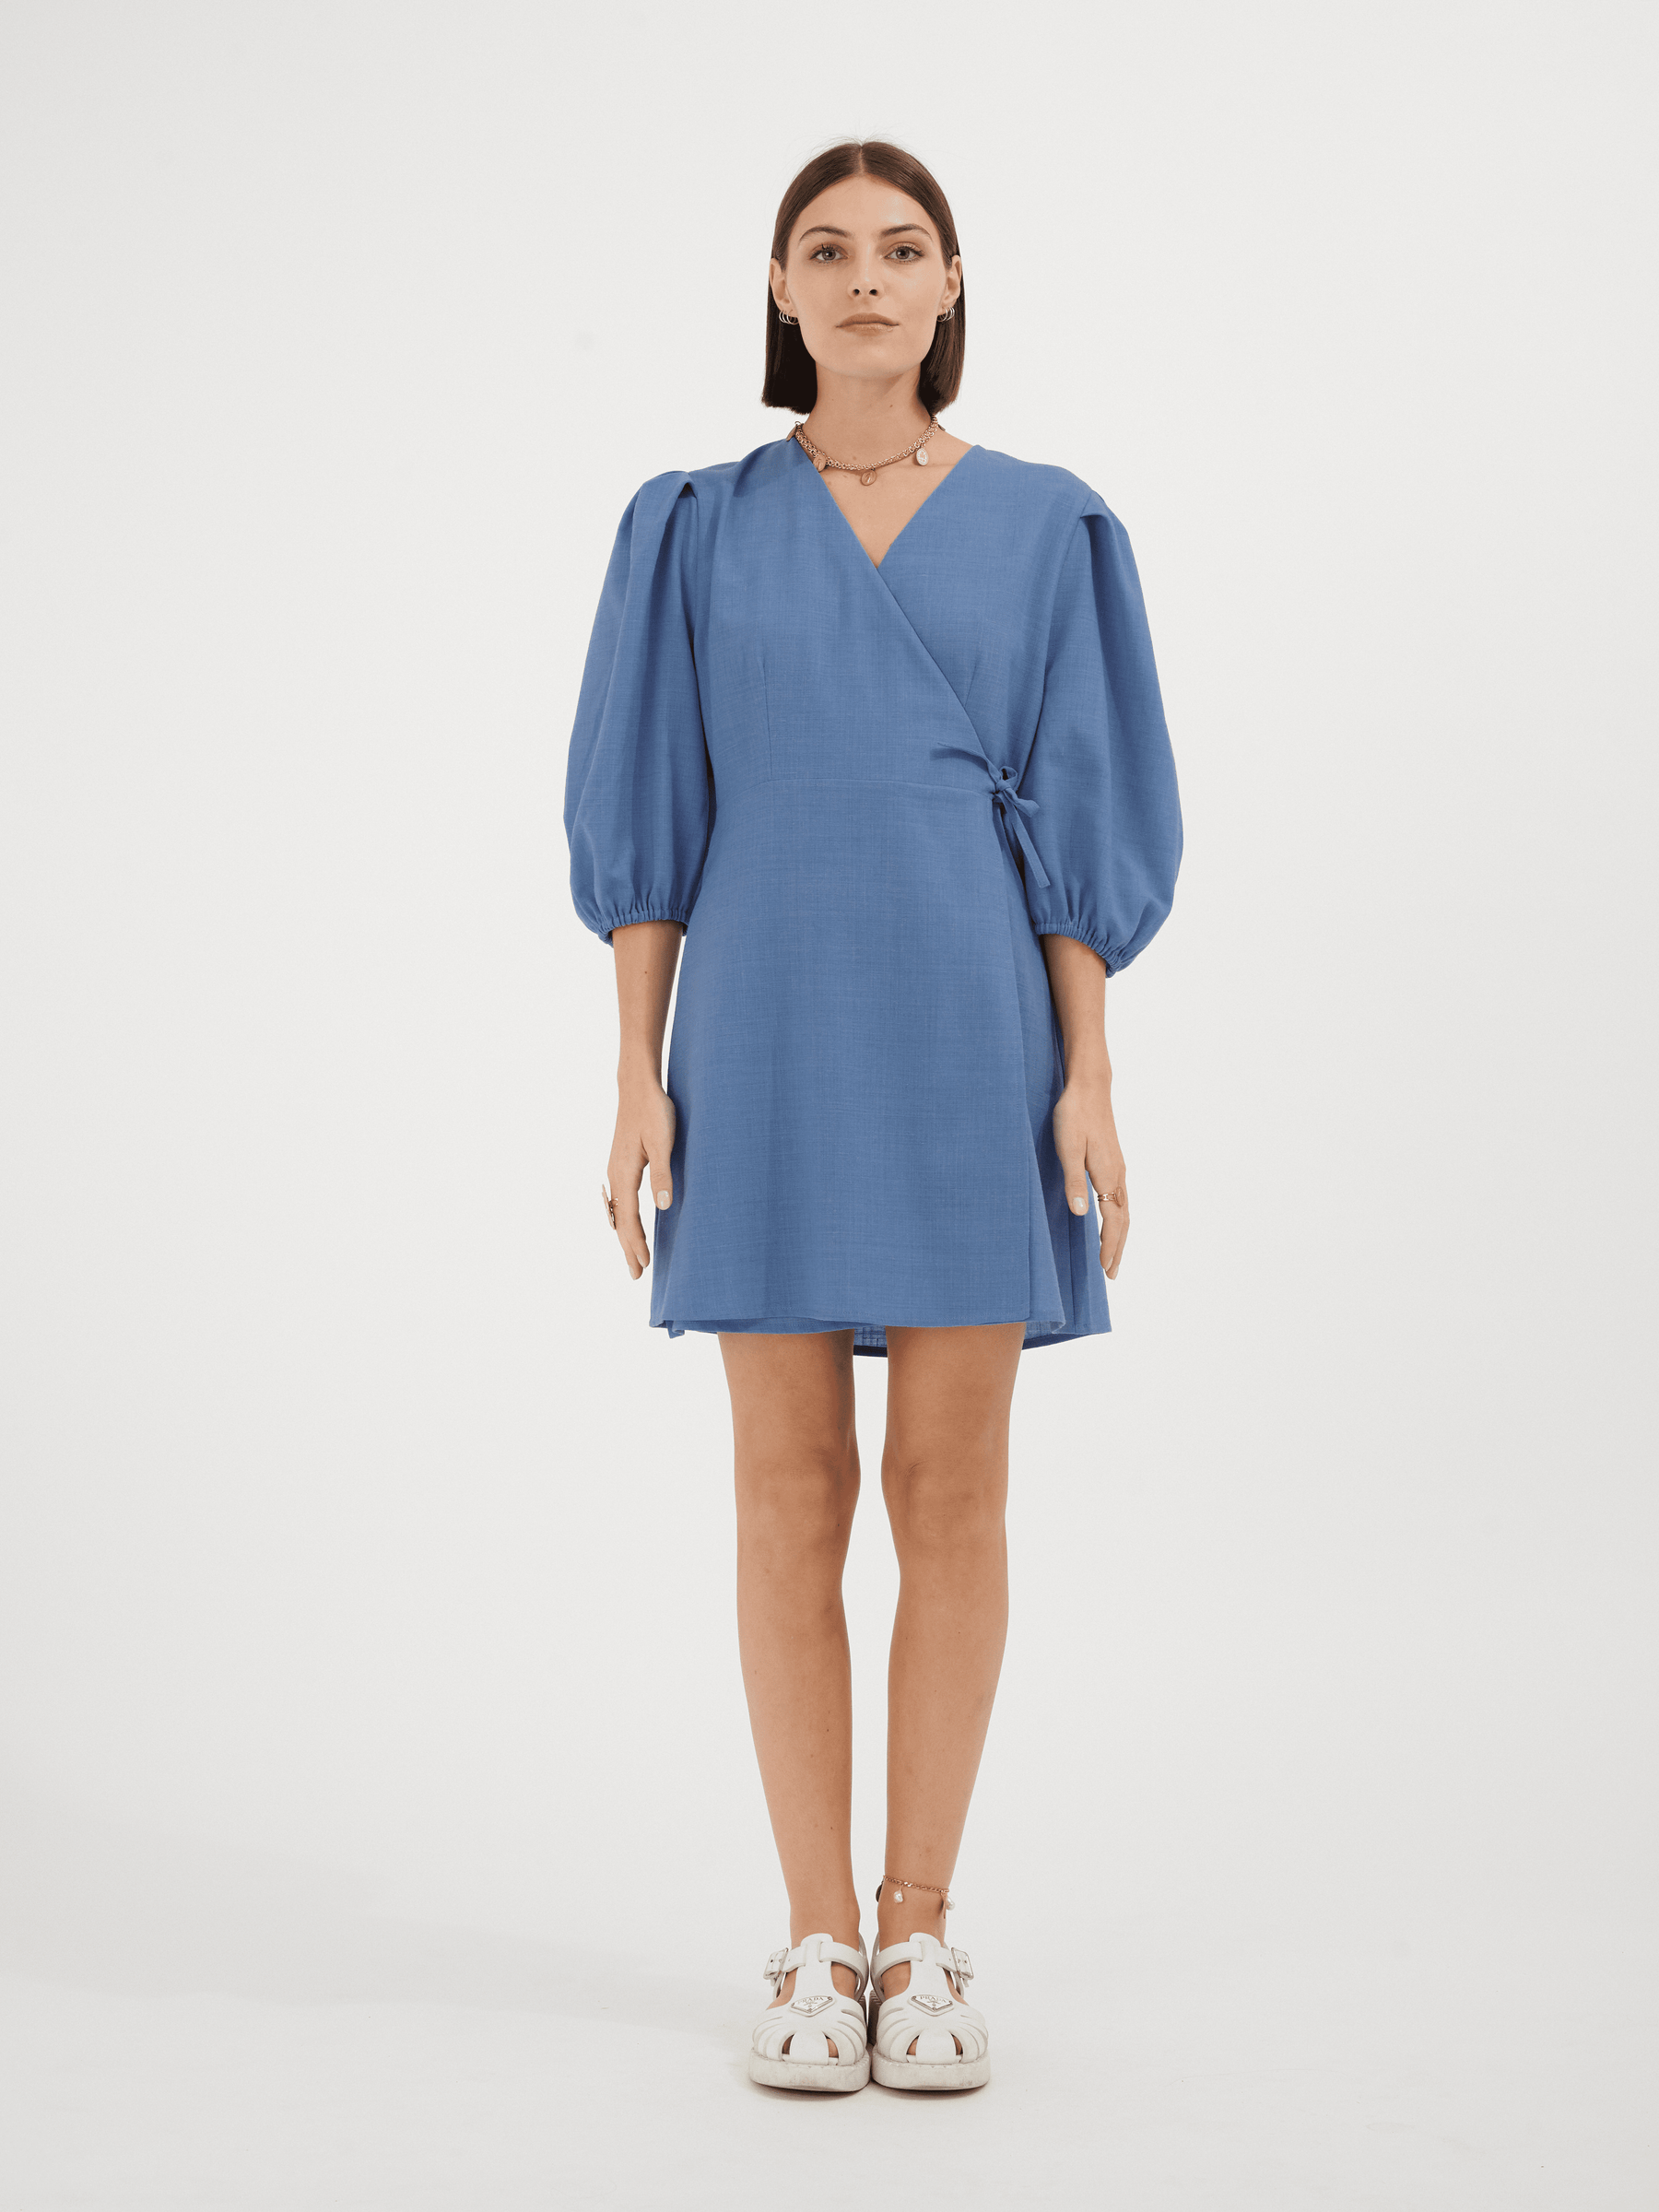 EURYDICE - Short wrap dress with balloon sleeves in Linen  and blue tencel Dress Fête Impériale